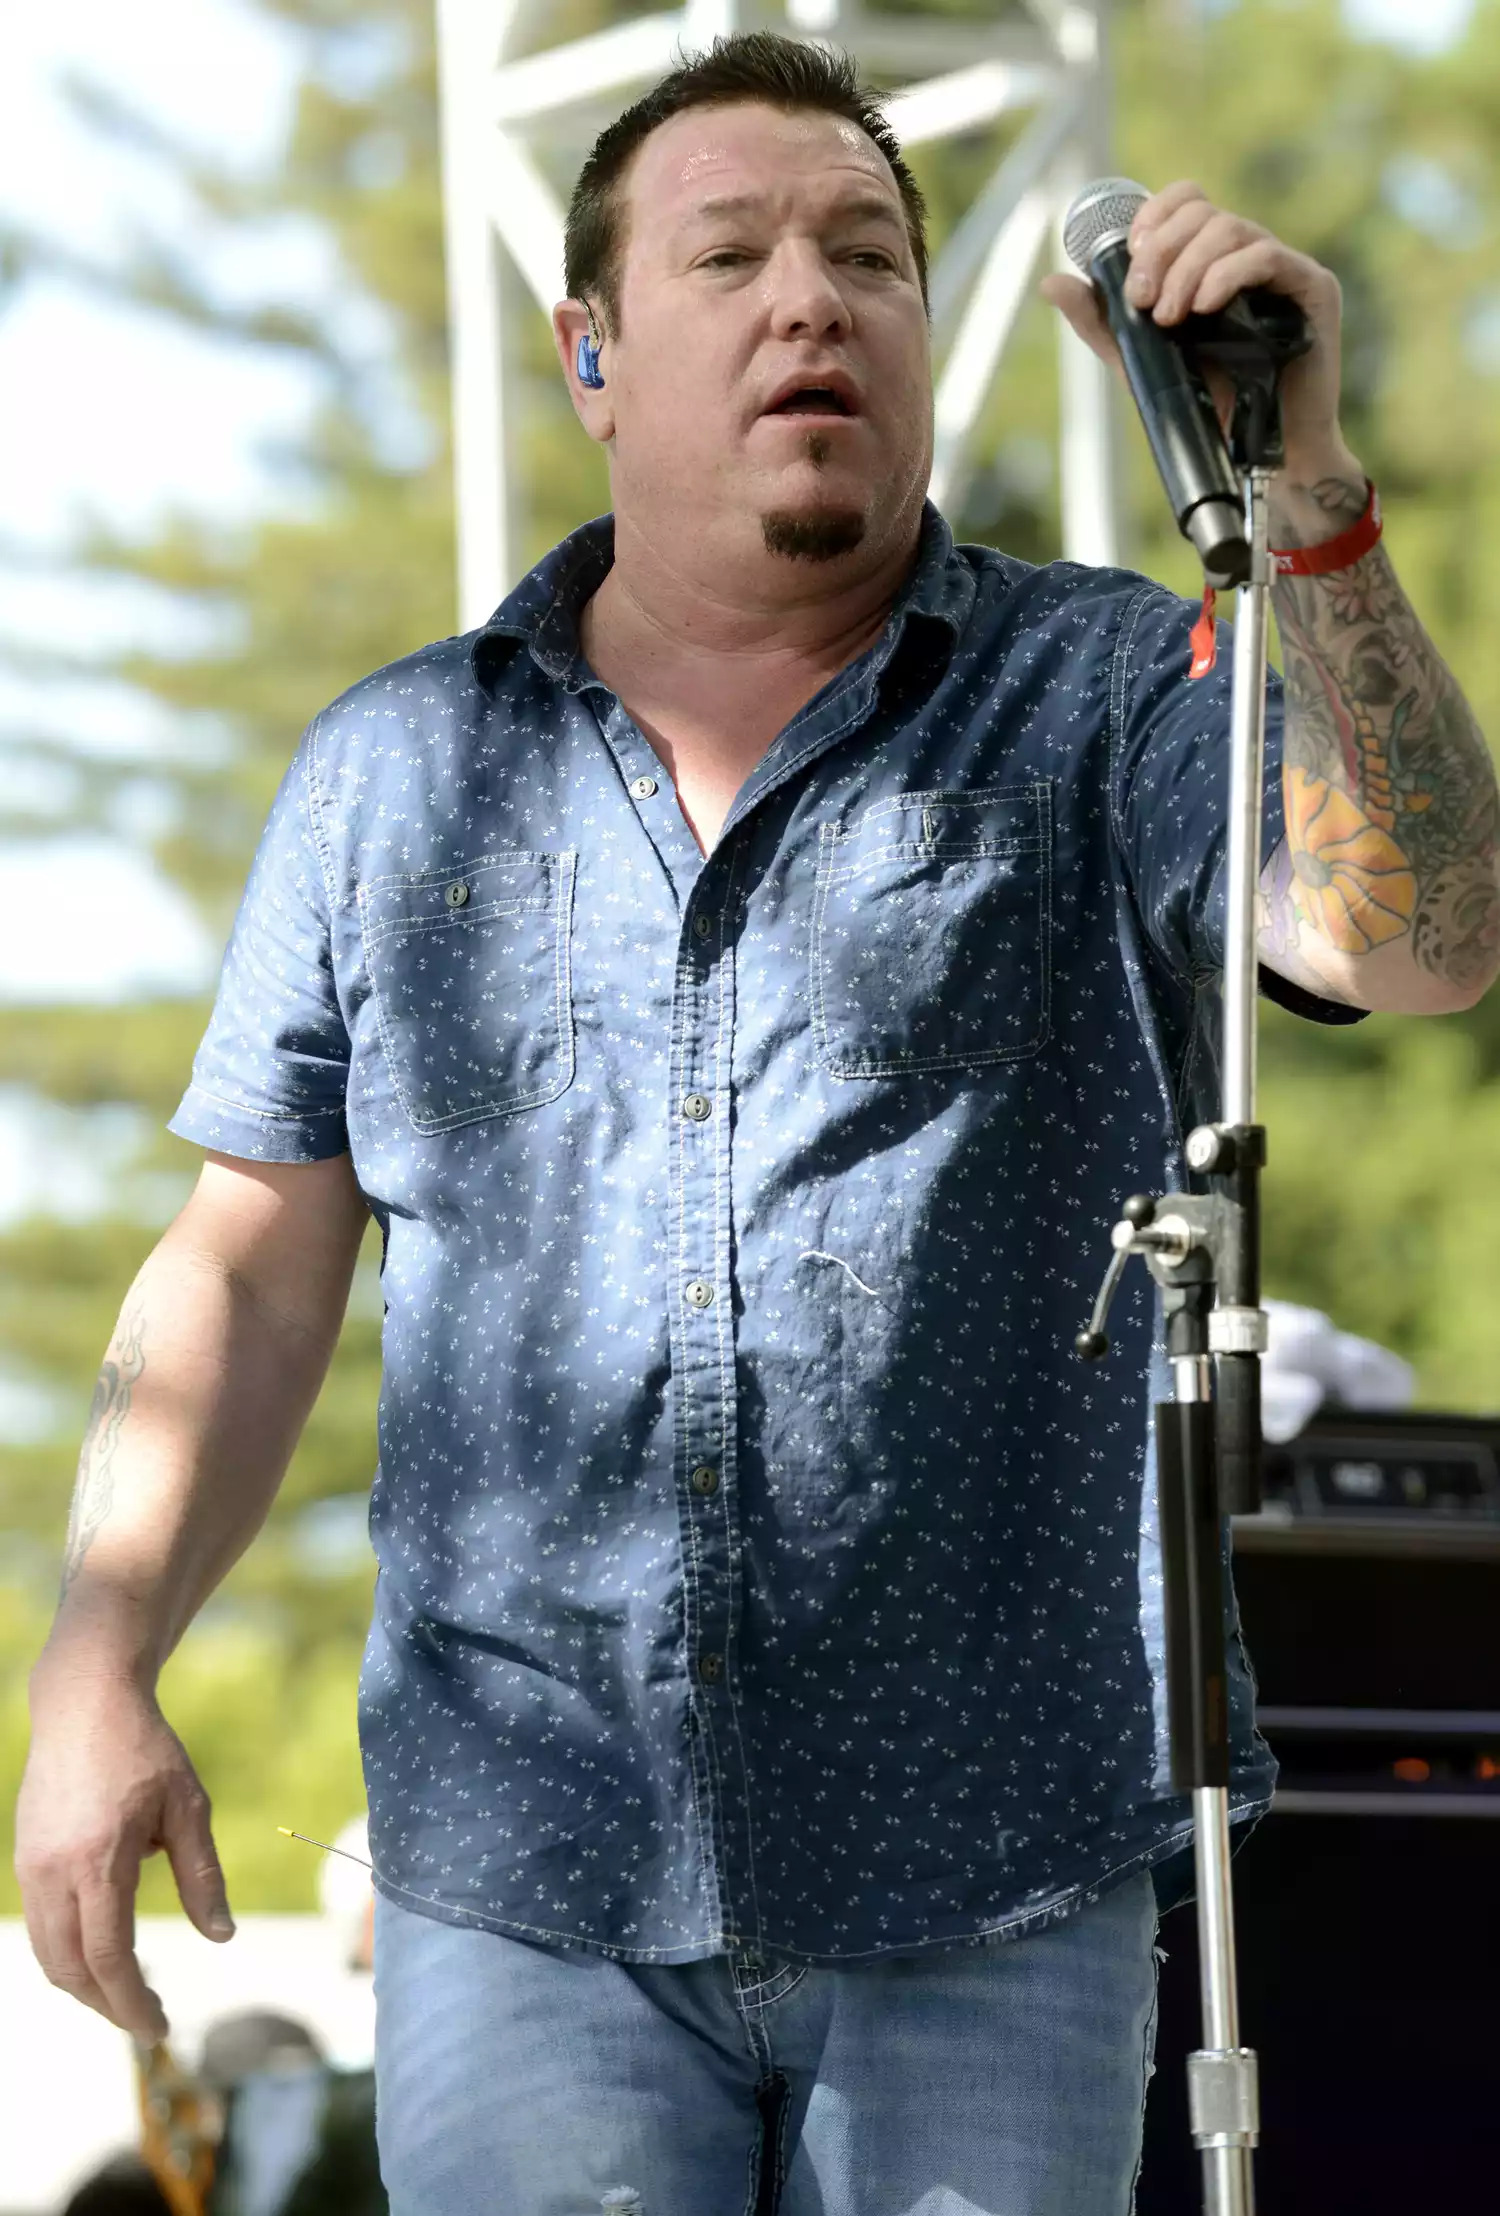 Smashmouth Frontman Steve Harwell Dead at 56